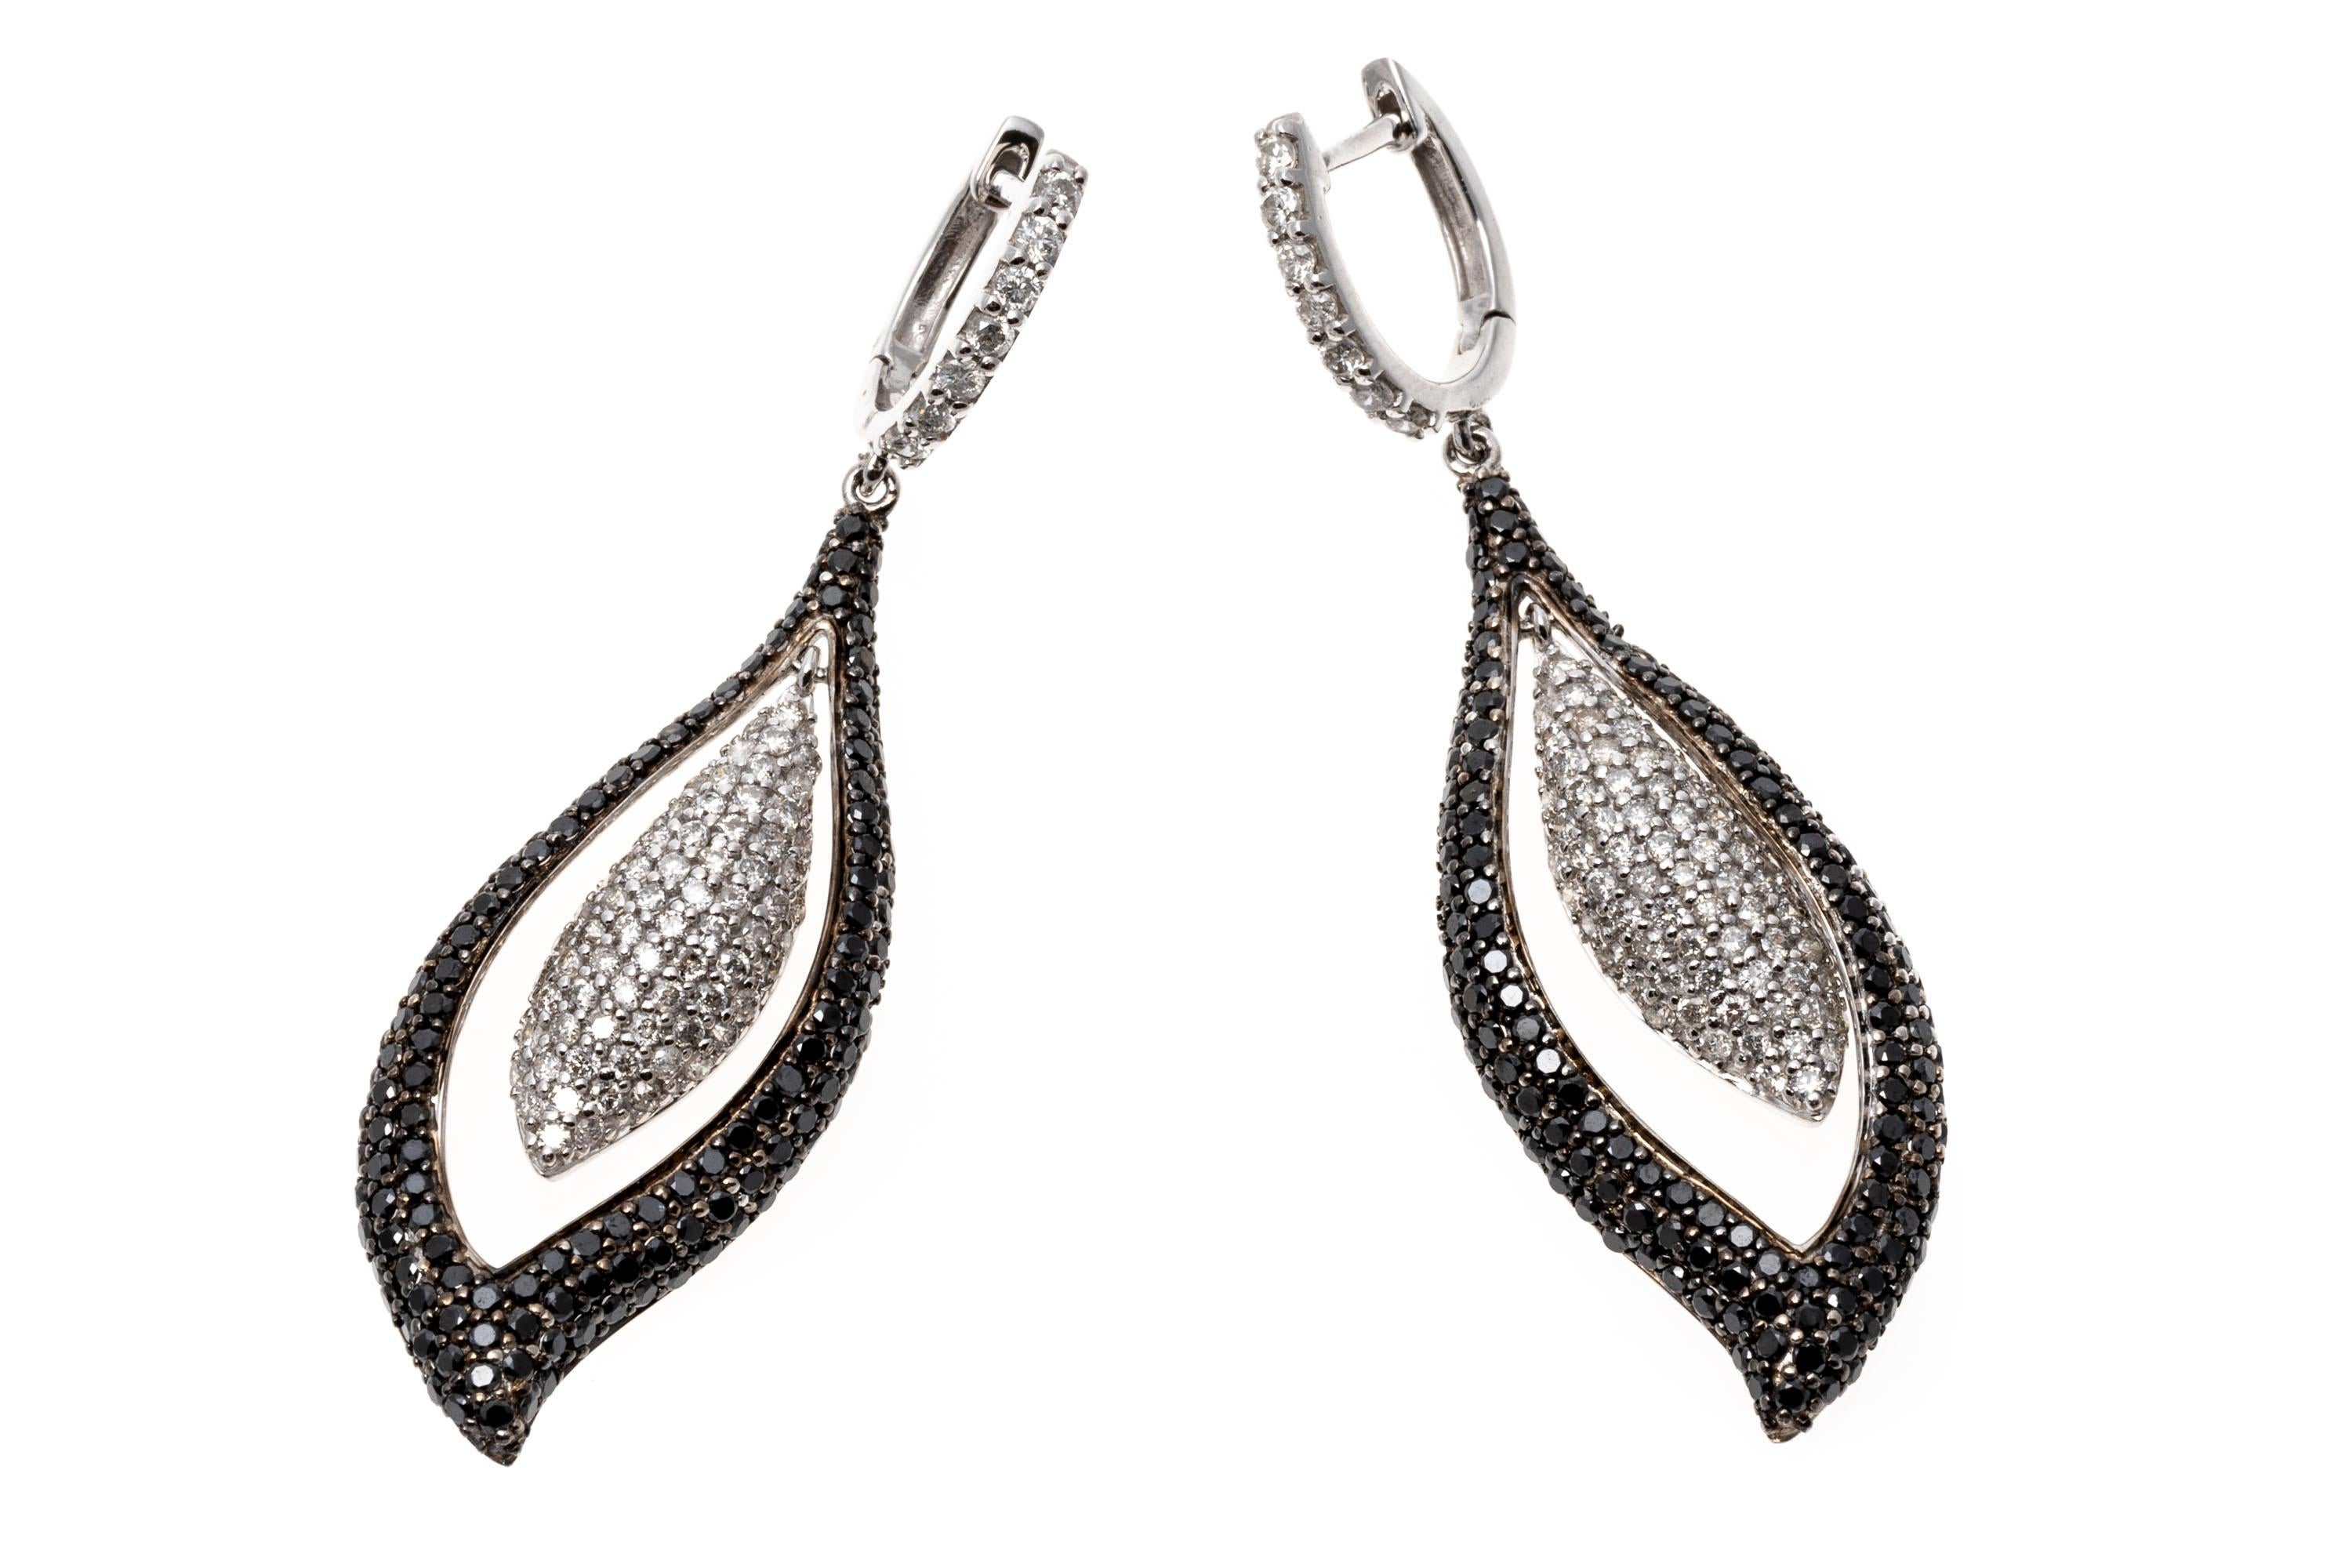 These brilliant 14K white gold earrings display an opposing design of leaf shaped pendants. The outer pendant is set with black diamonds while the inset one presents white diamonds creating an eye-catching contrast. The diamonds are approximately